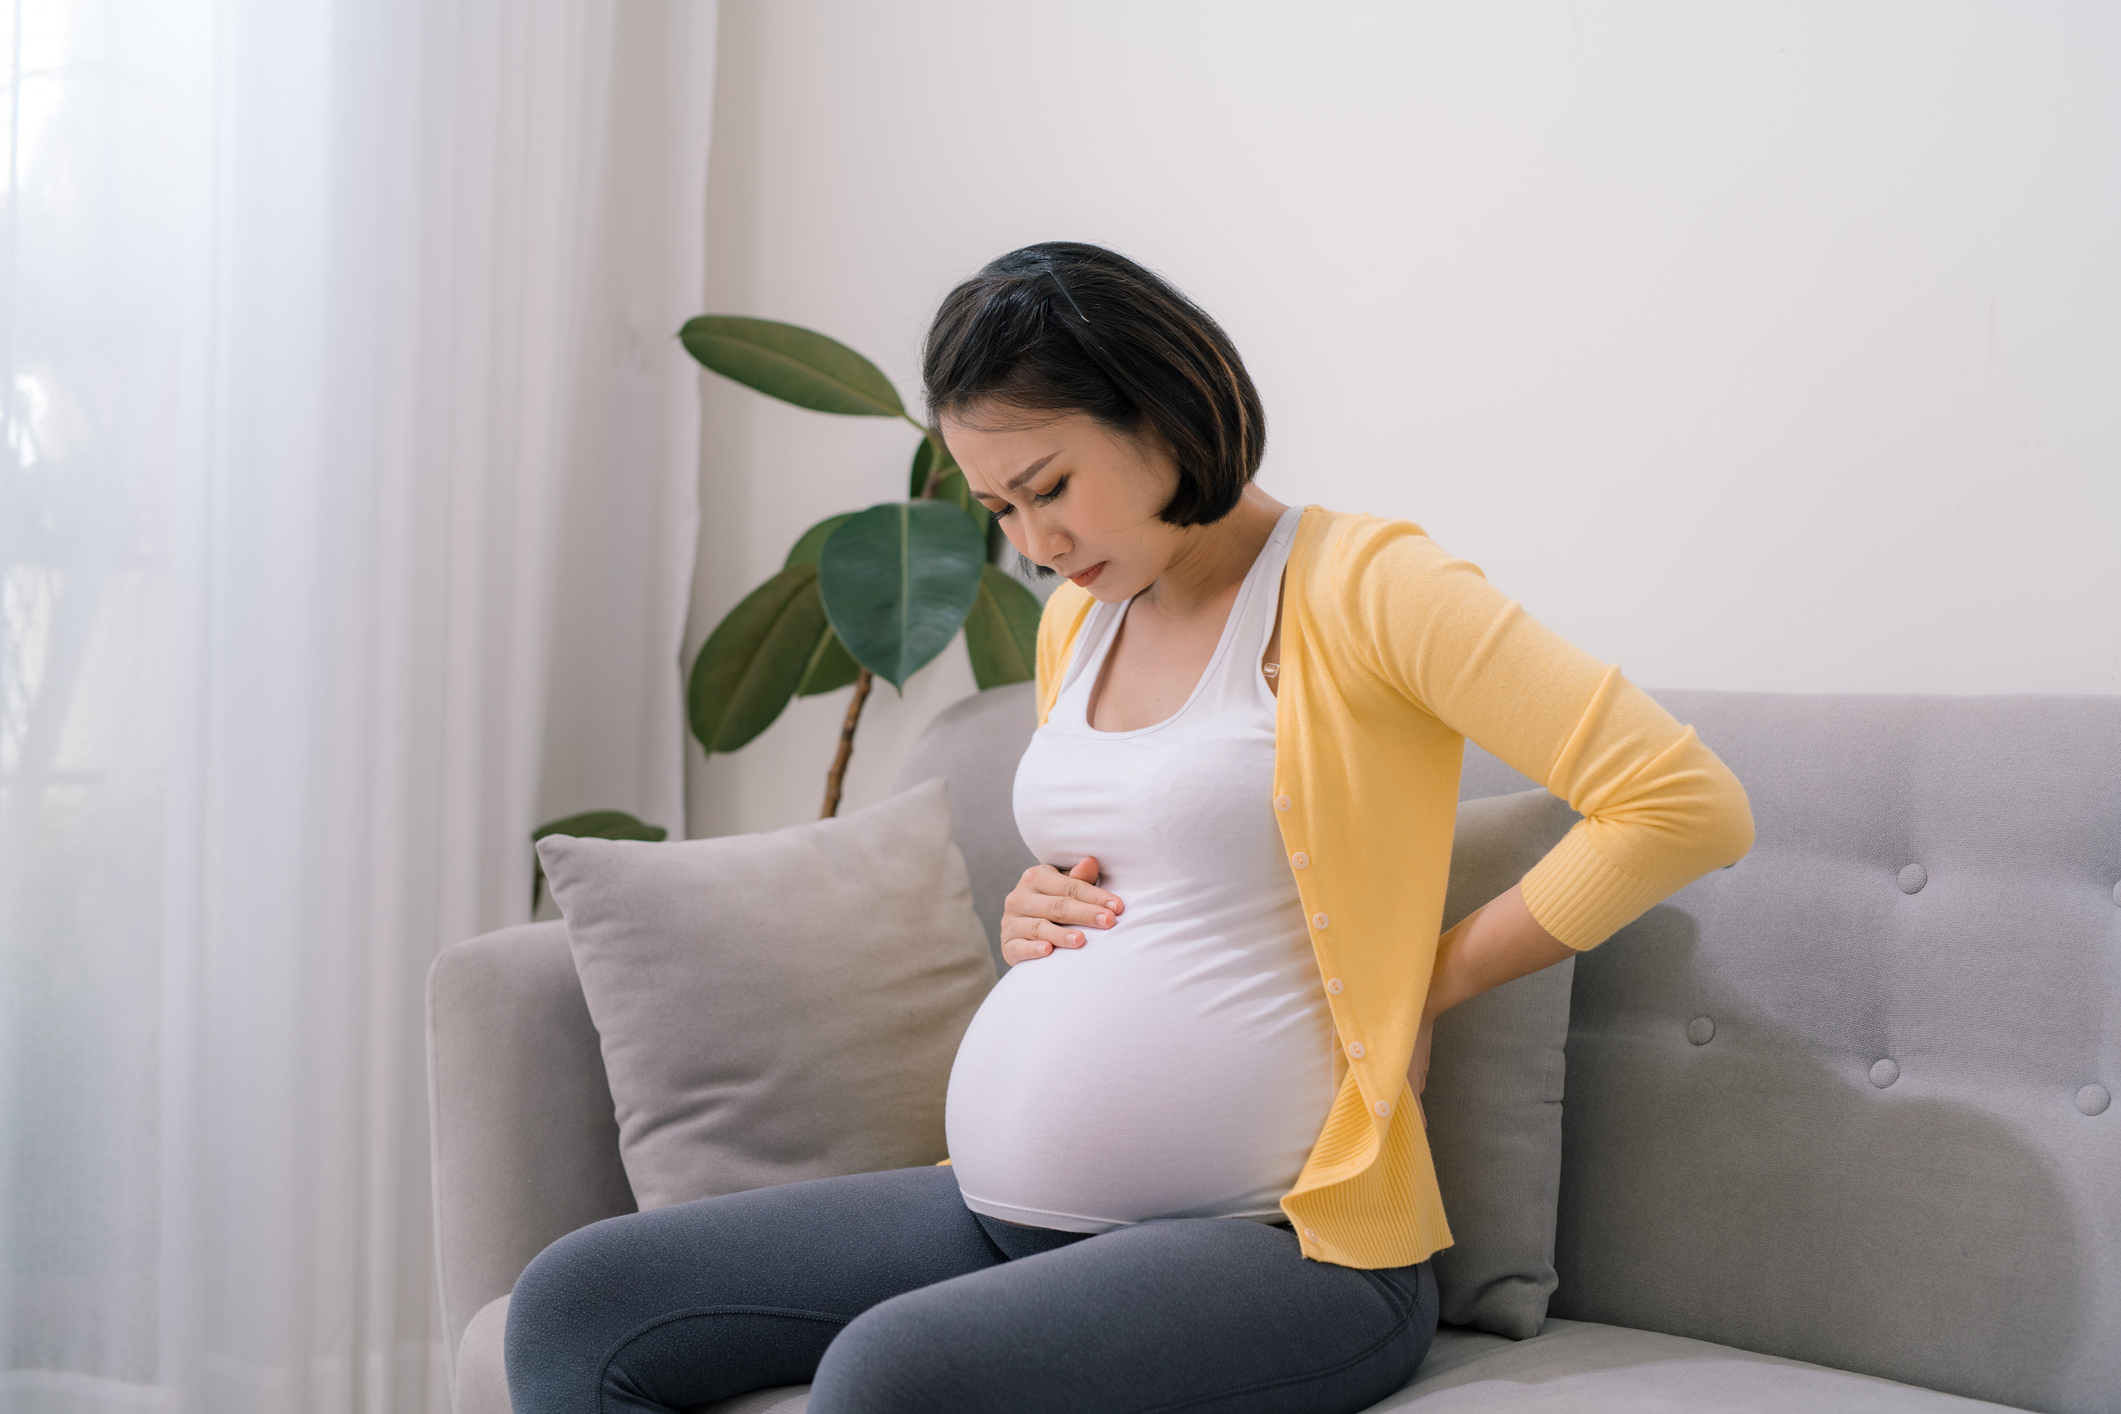 Pregnant woman experiencing discomfort sitting on the couch